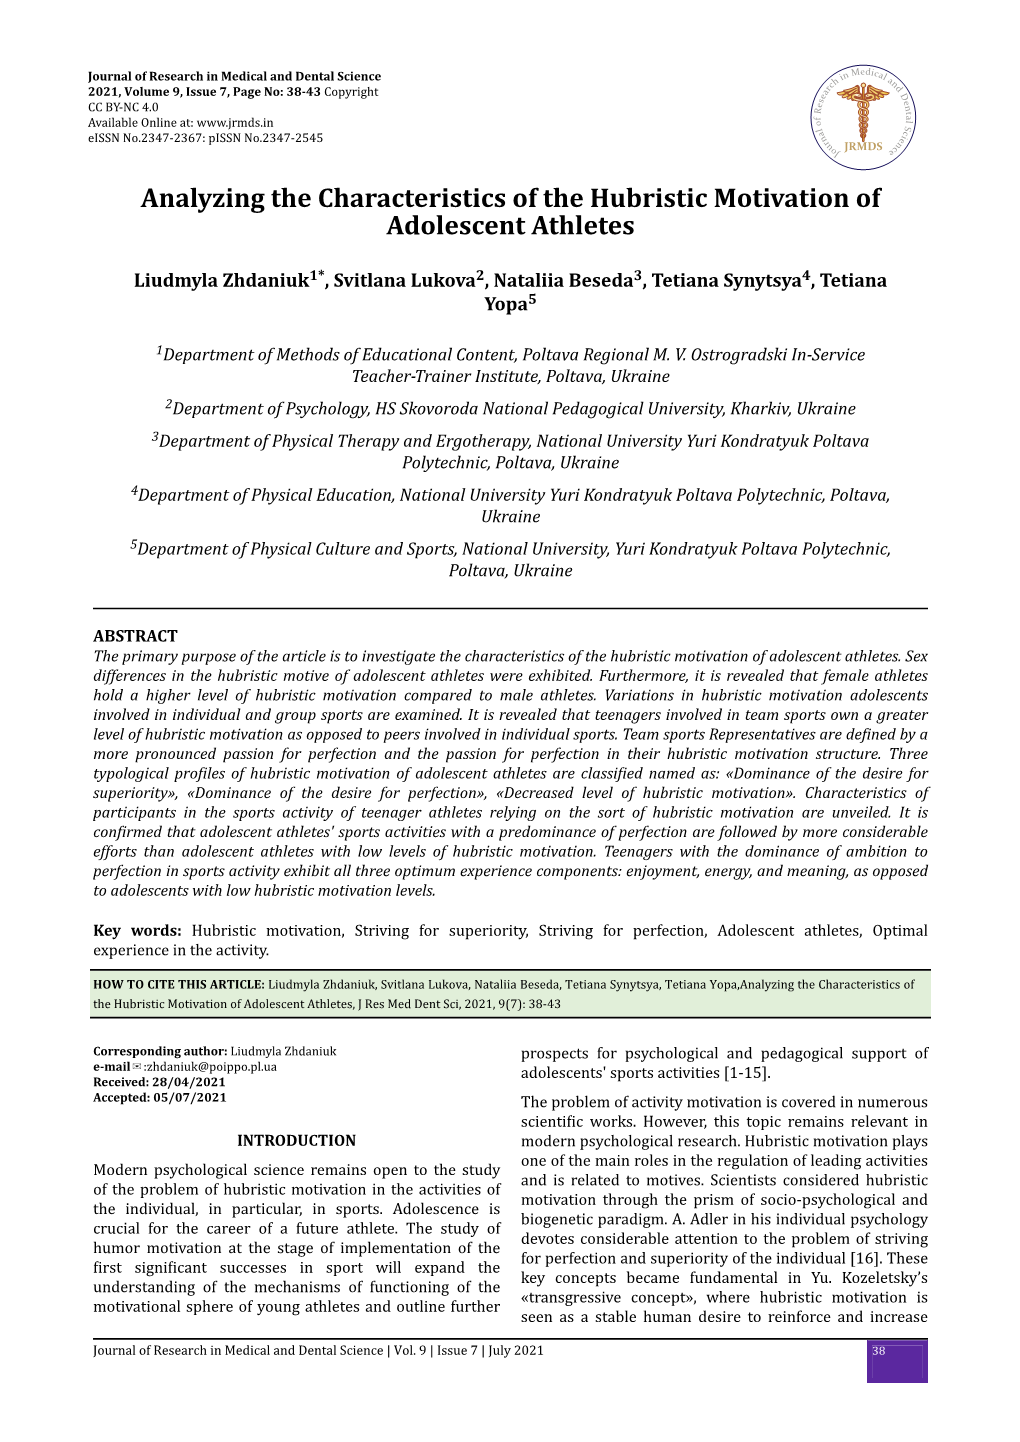 Analyzing the Characteristics of the Hubristic Motivation of Adolescent Athletes